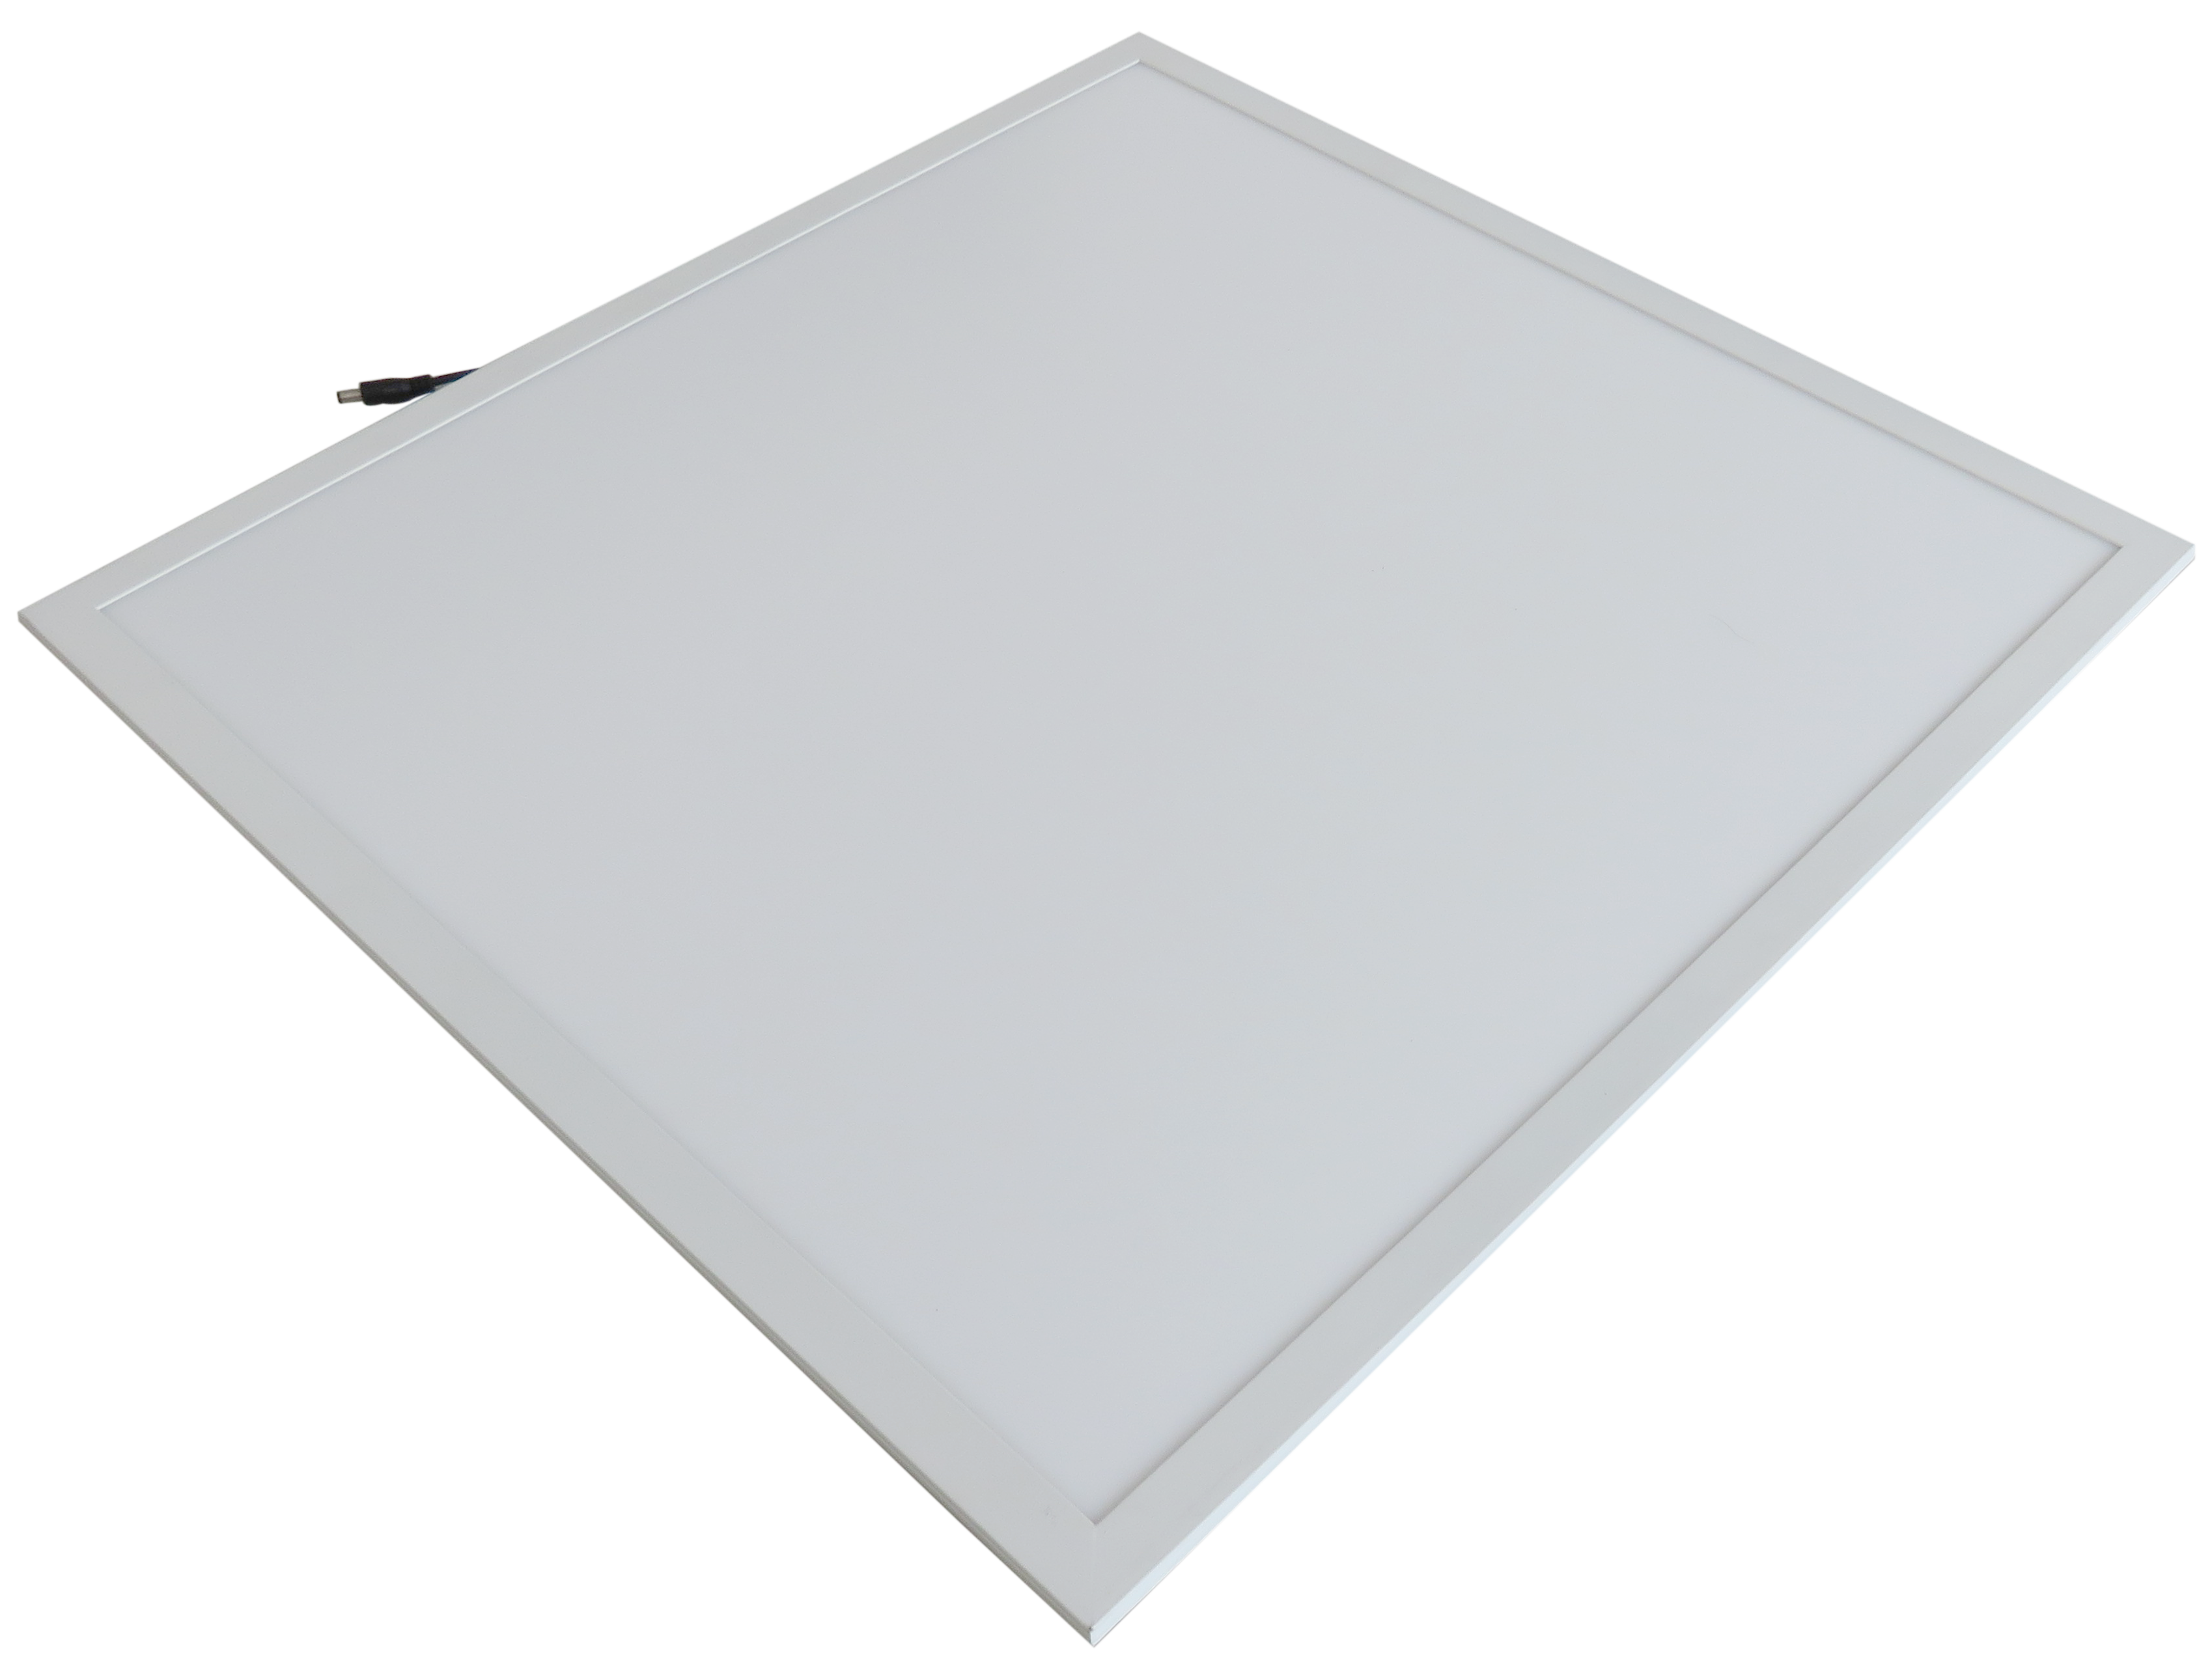 Corp SLIM PANEL LED 40W 60x60 5200lm NW 840 30 HE new